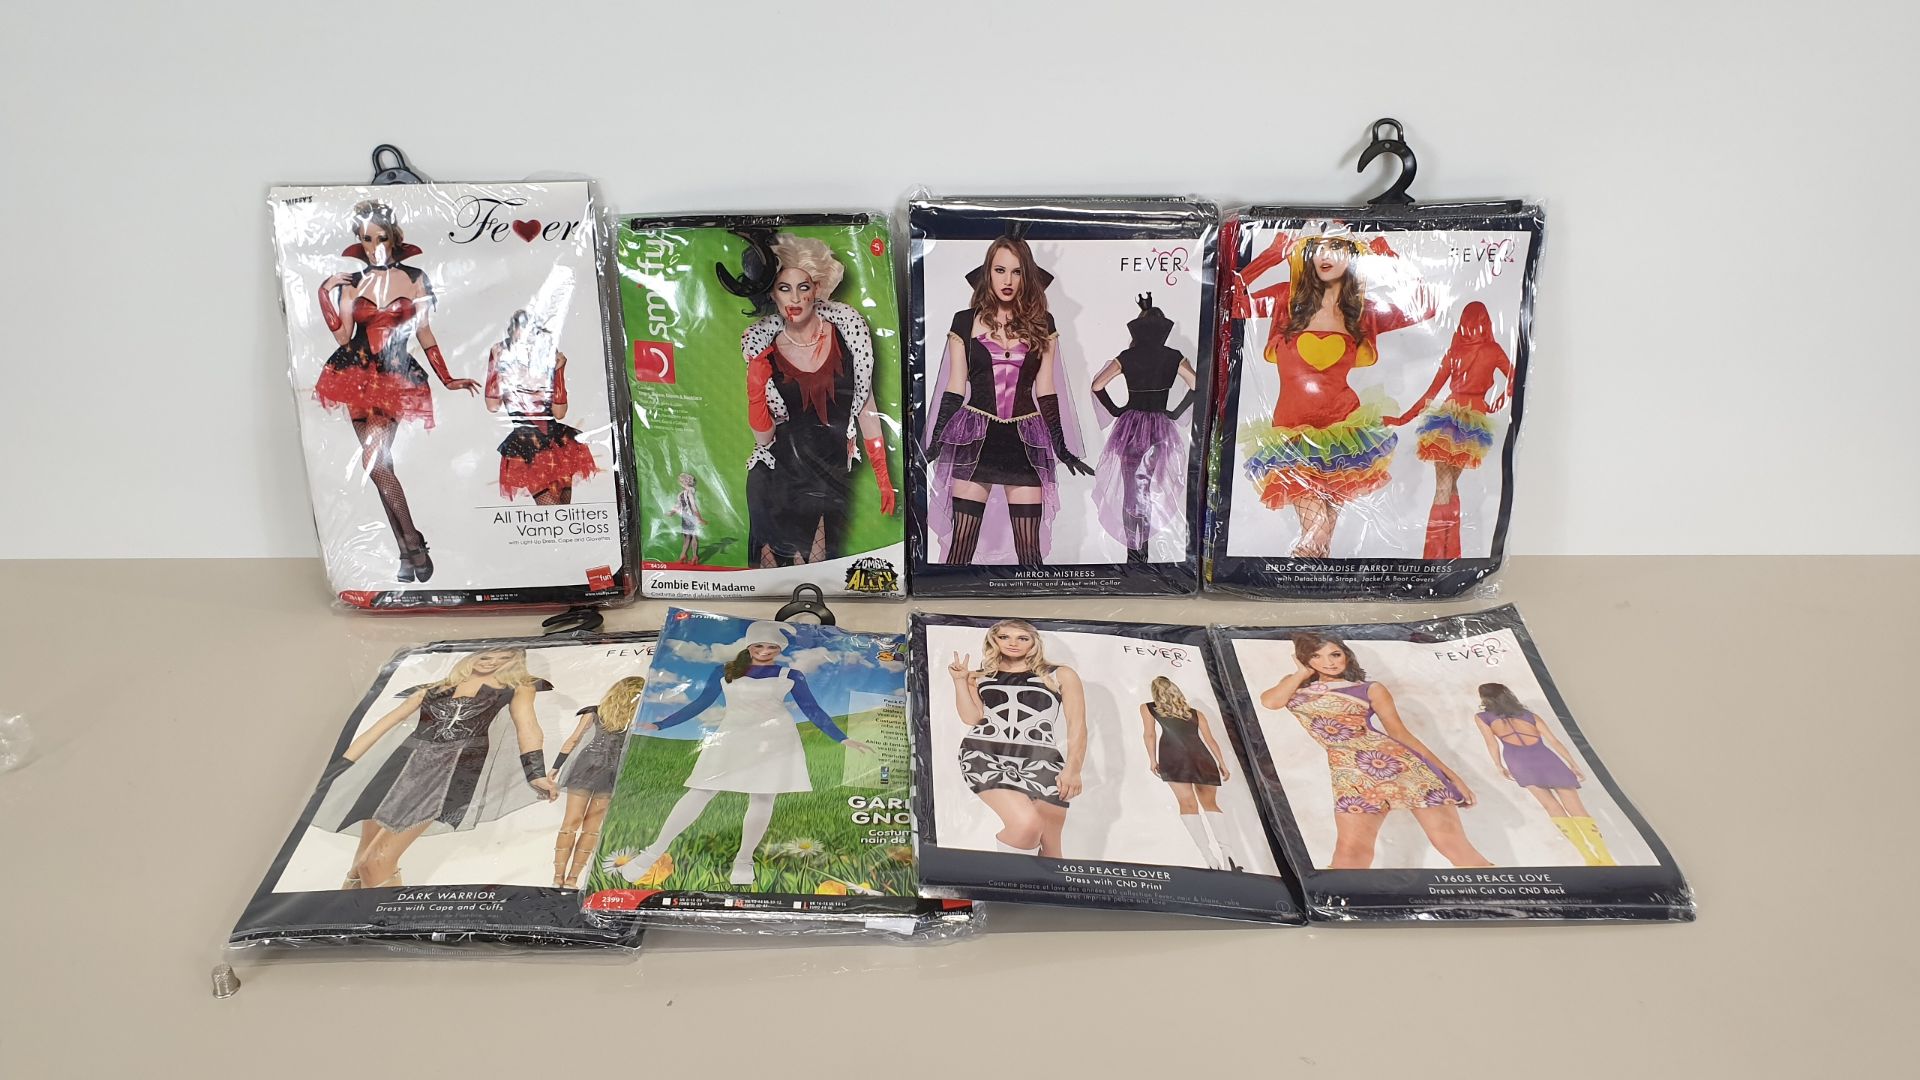 48 X ASSORTED COSTUMES - IN ASSORTED BRANDS (SMIFFYS, FEVER ETC), STYLES AND SIZES - IN 2 BOXES